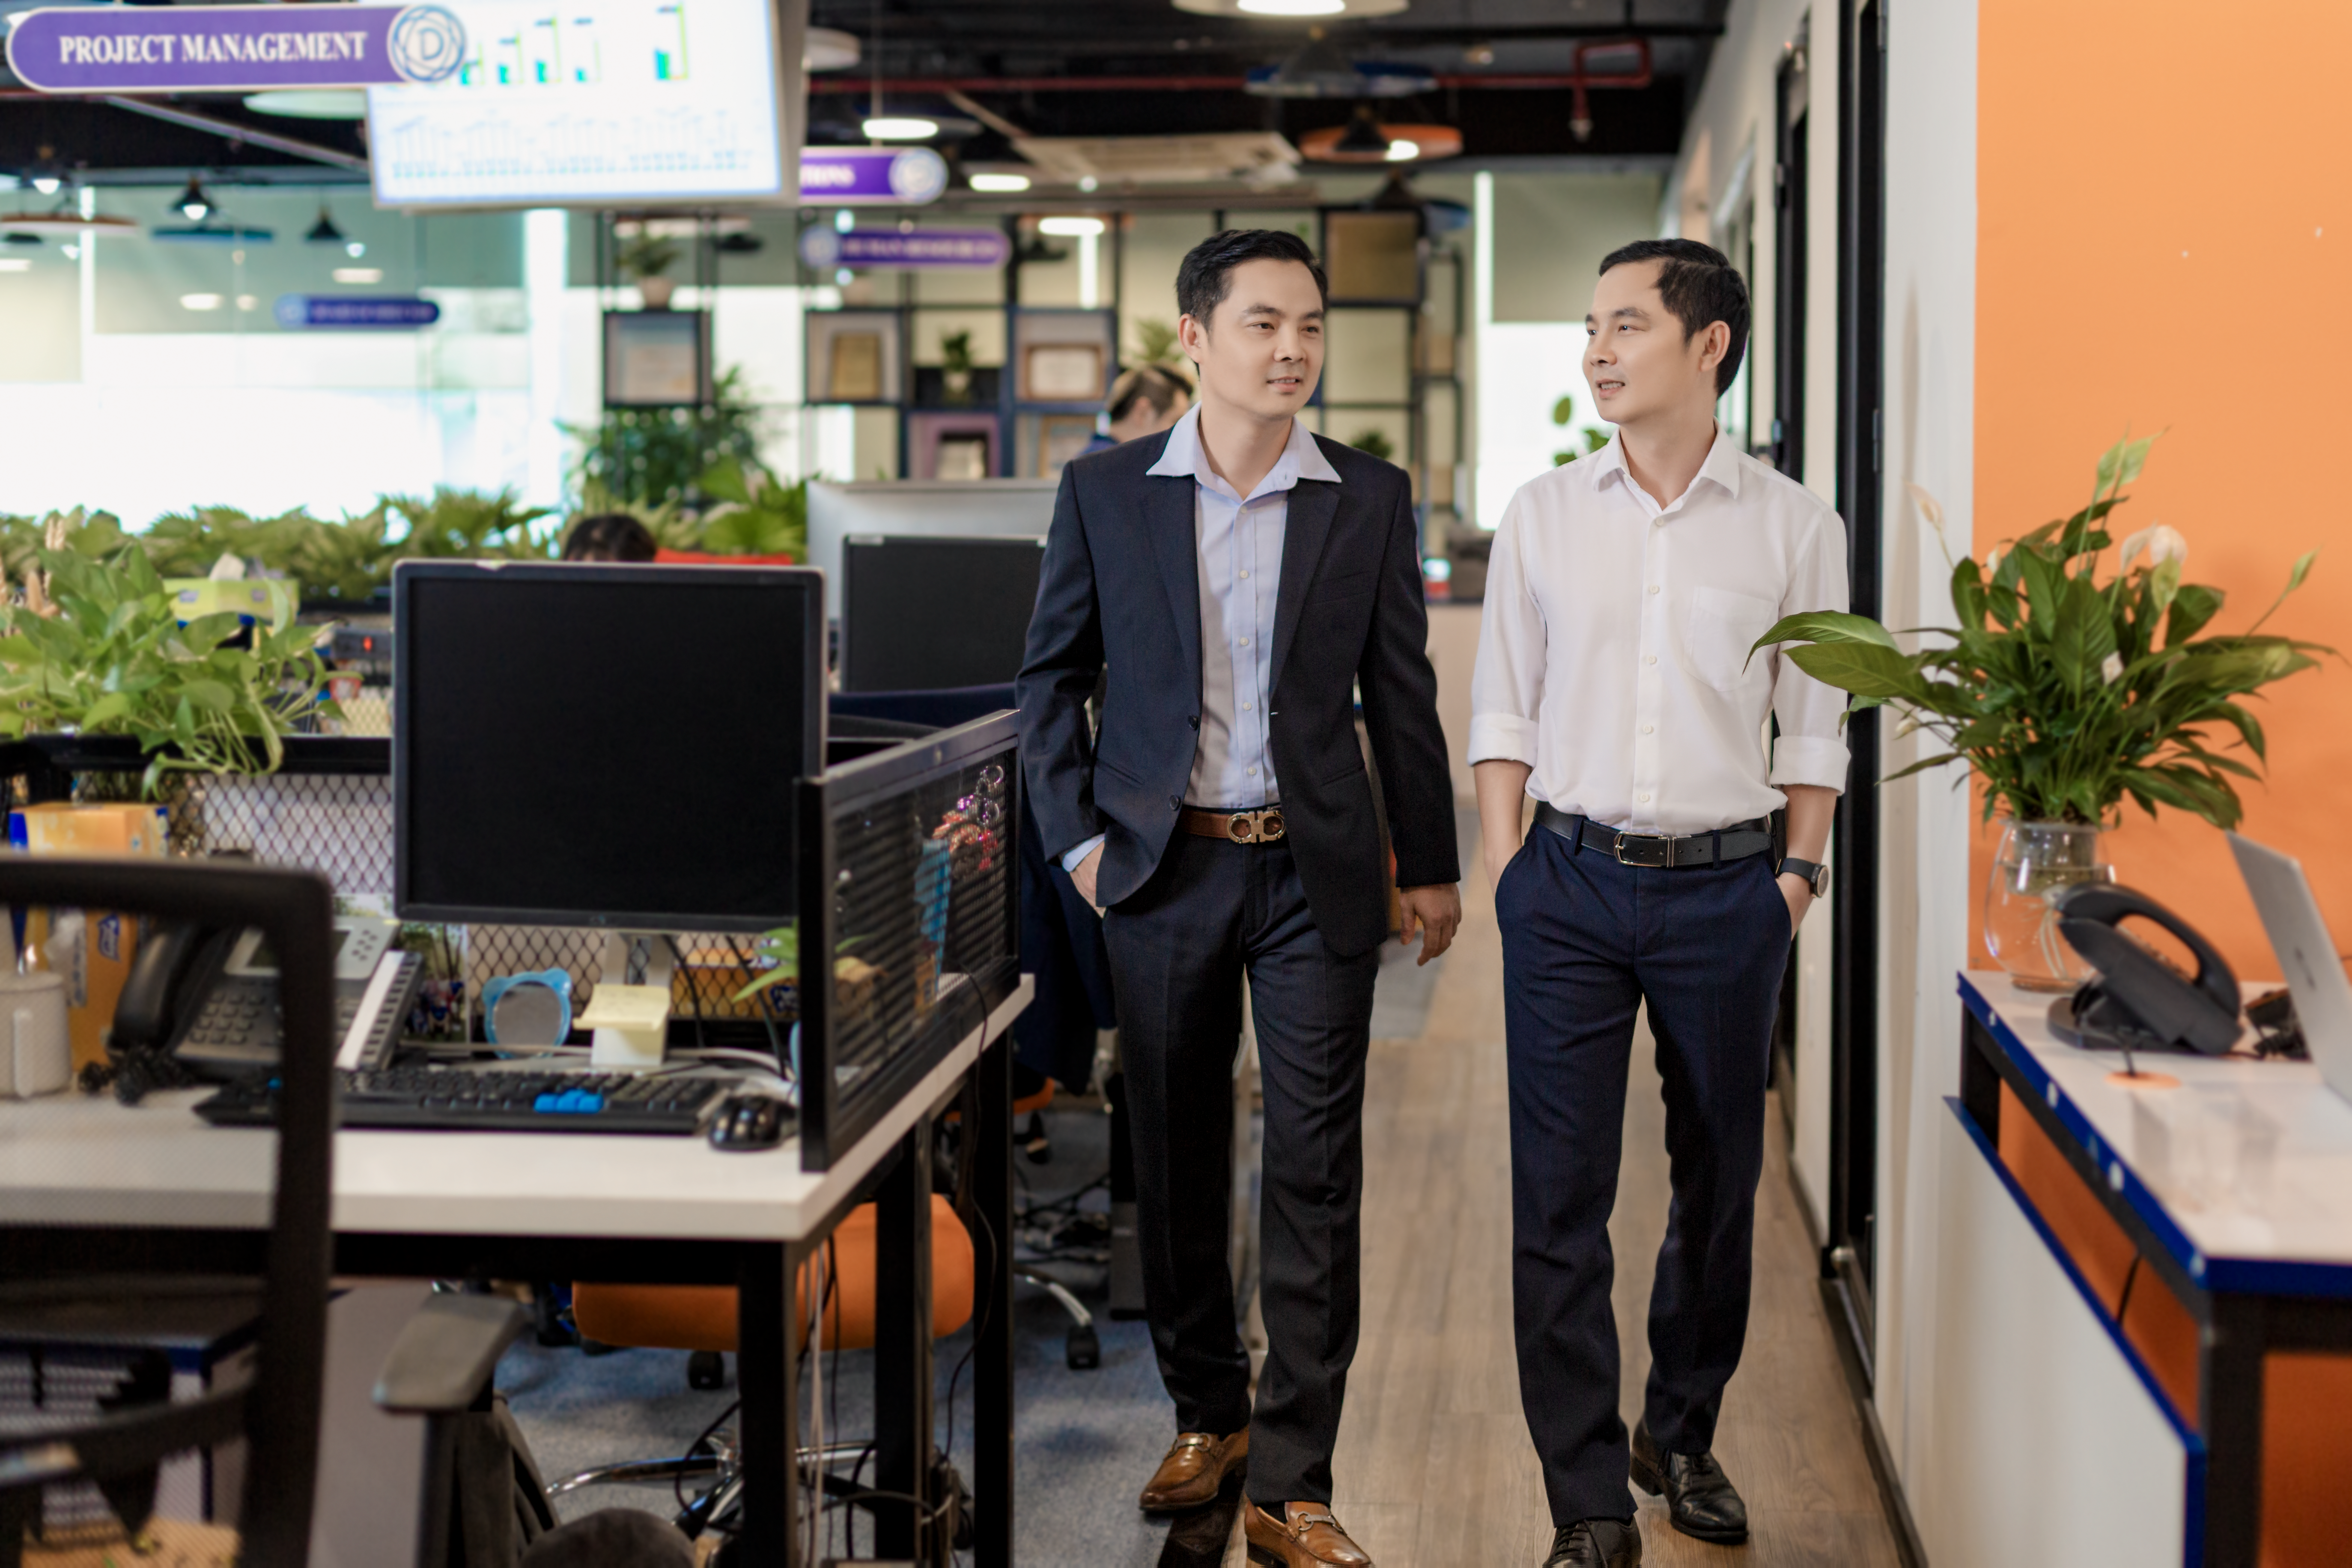 MFast founders Phan Thanh Long and Phan Thanh Vinh